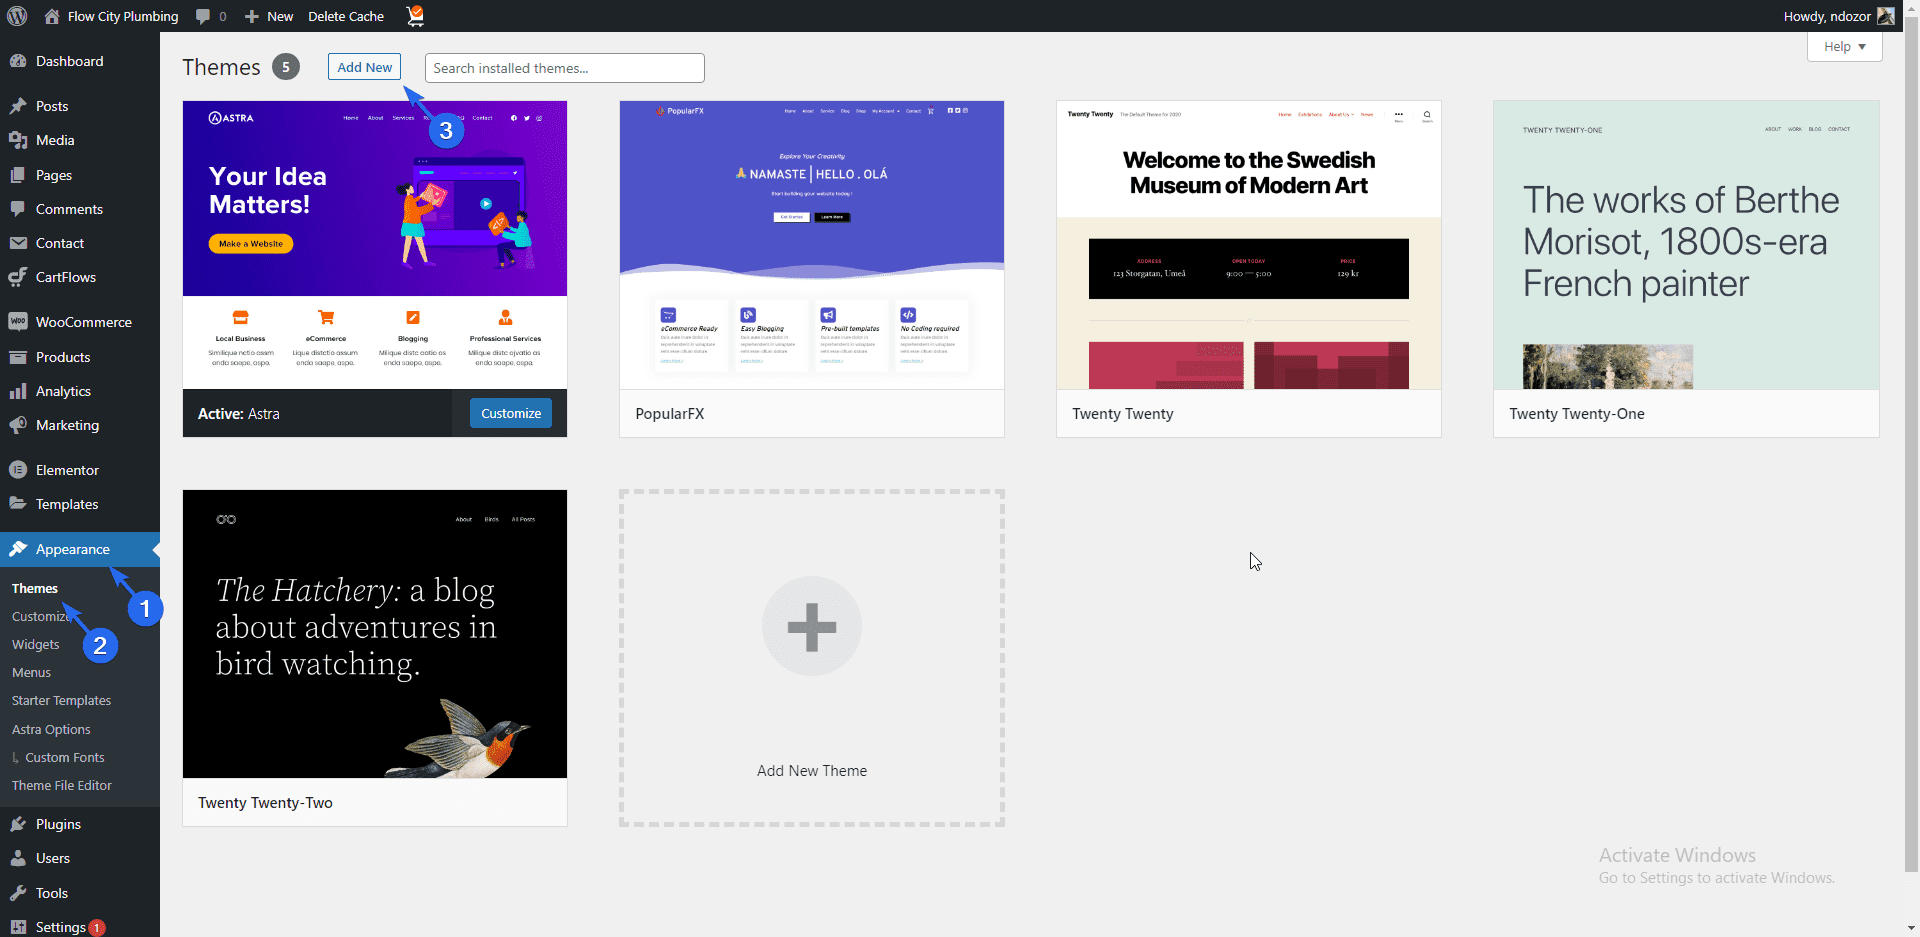 Themes page